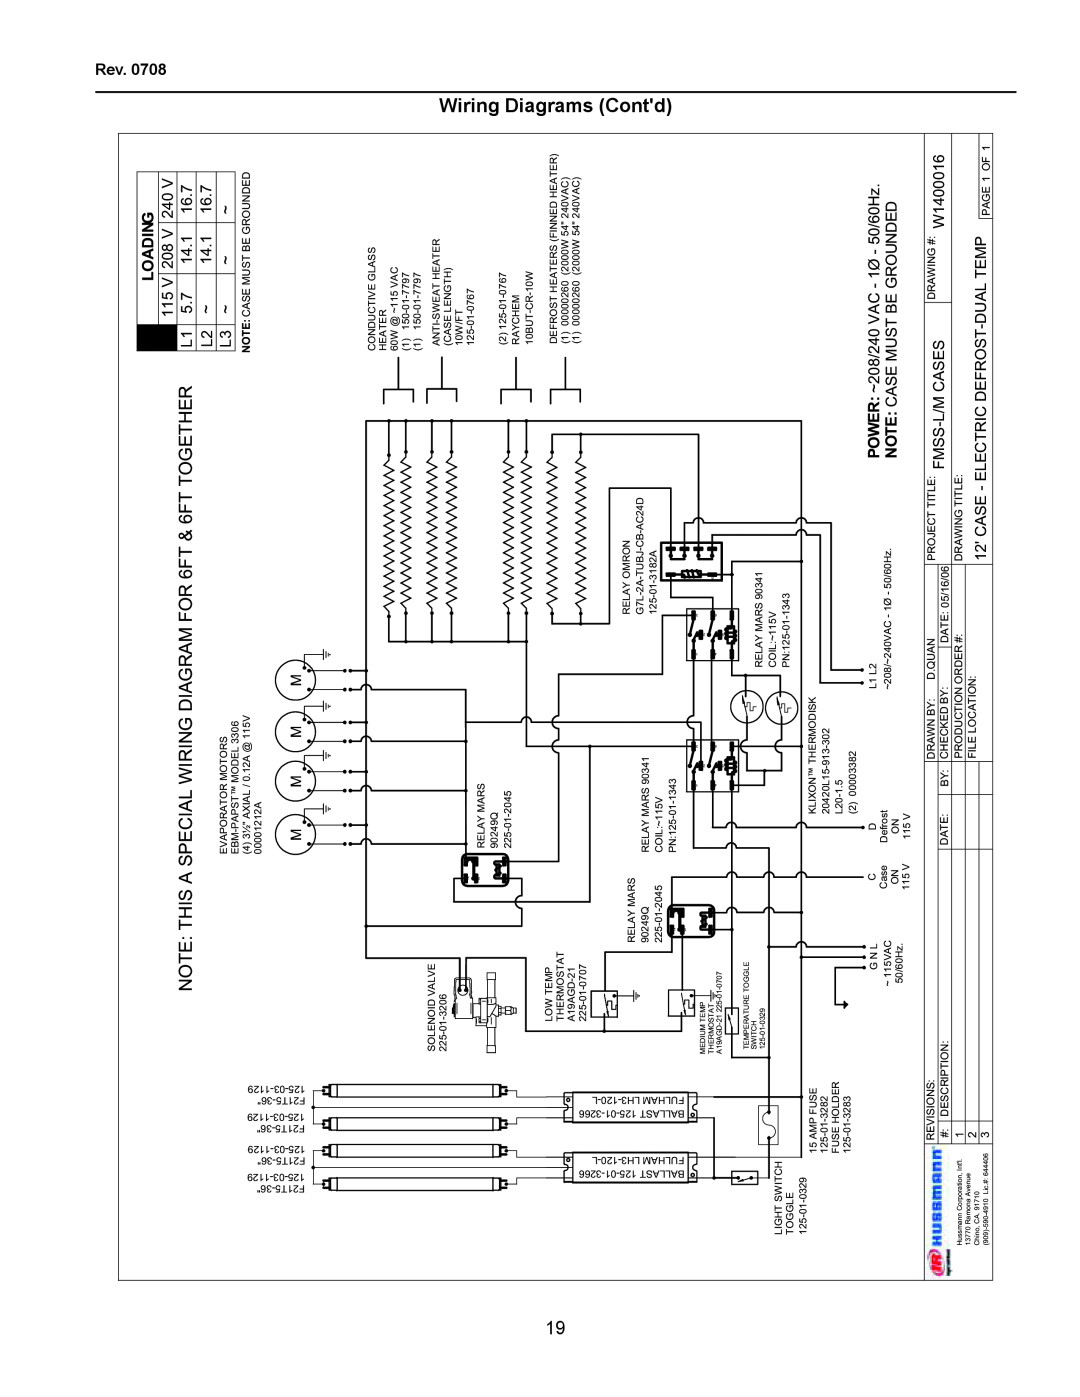 hussman FMSS-L operation manual Wiring, NOTE THIS A SPECIAL WIRING DIAGRAM FOR 6FT & 6FT TOGETHER, Loading 